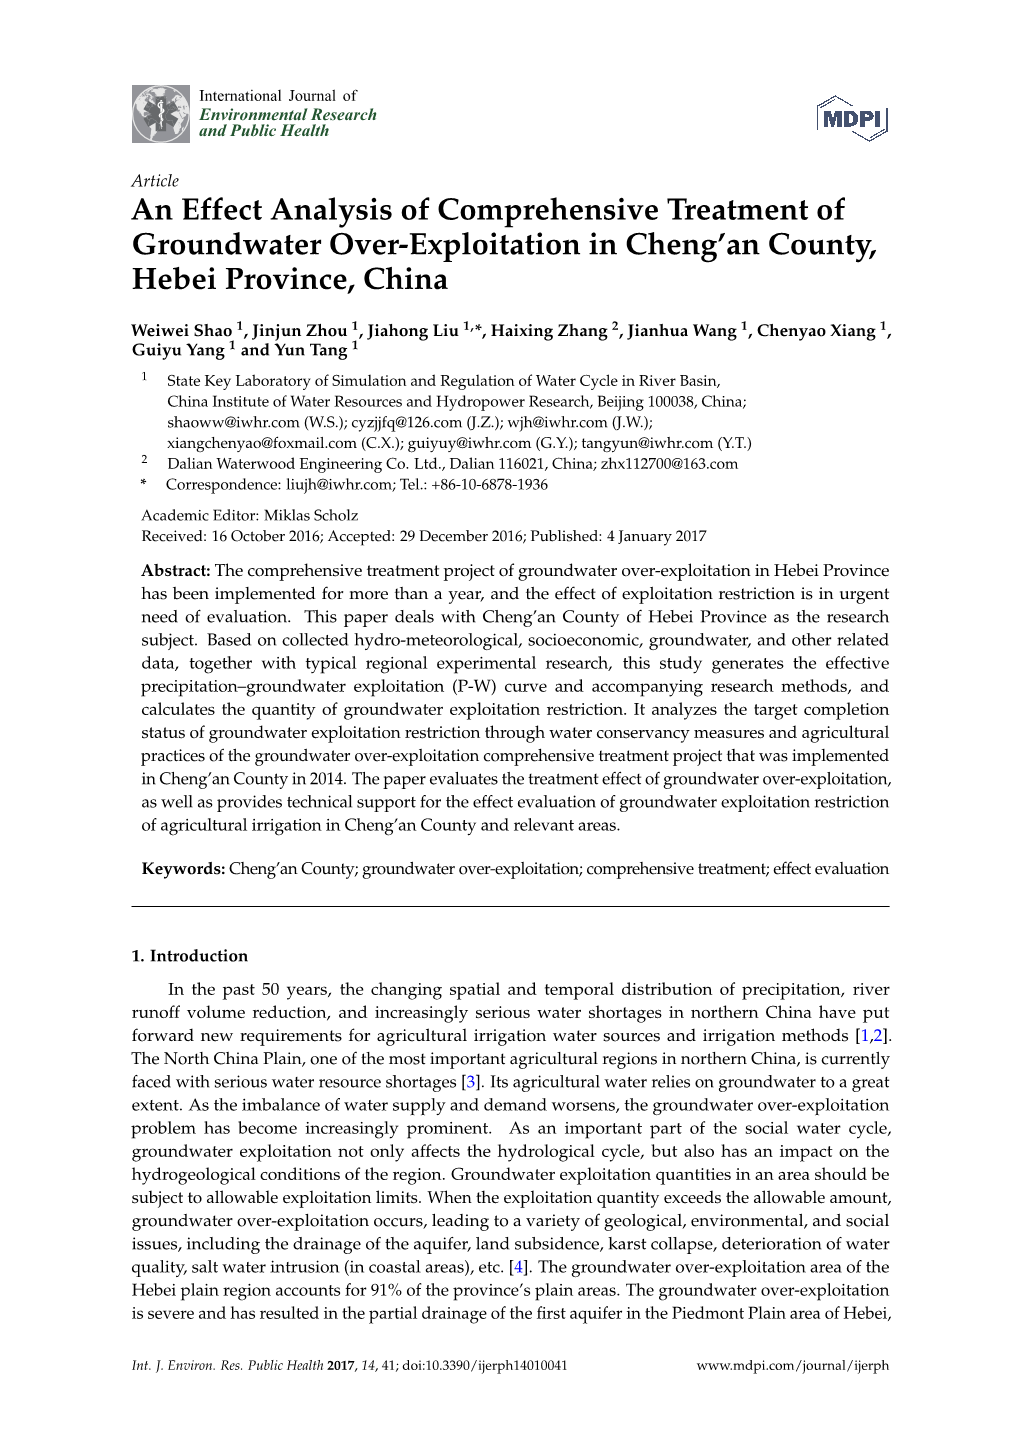 An Effect Analysis of Comprehensive Treatment of Groundwater Over-Exploitation in Cheng'an County, Hebei Province, China